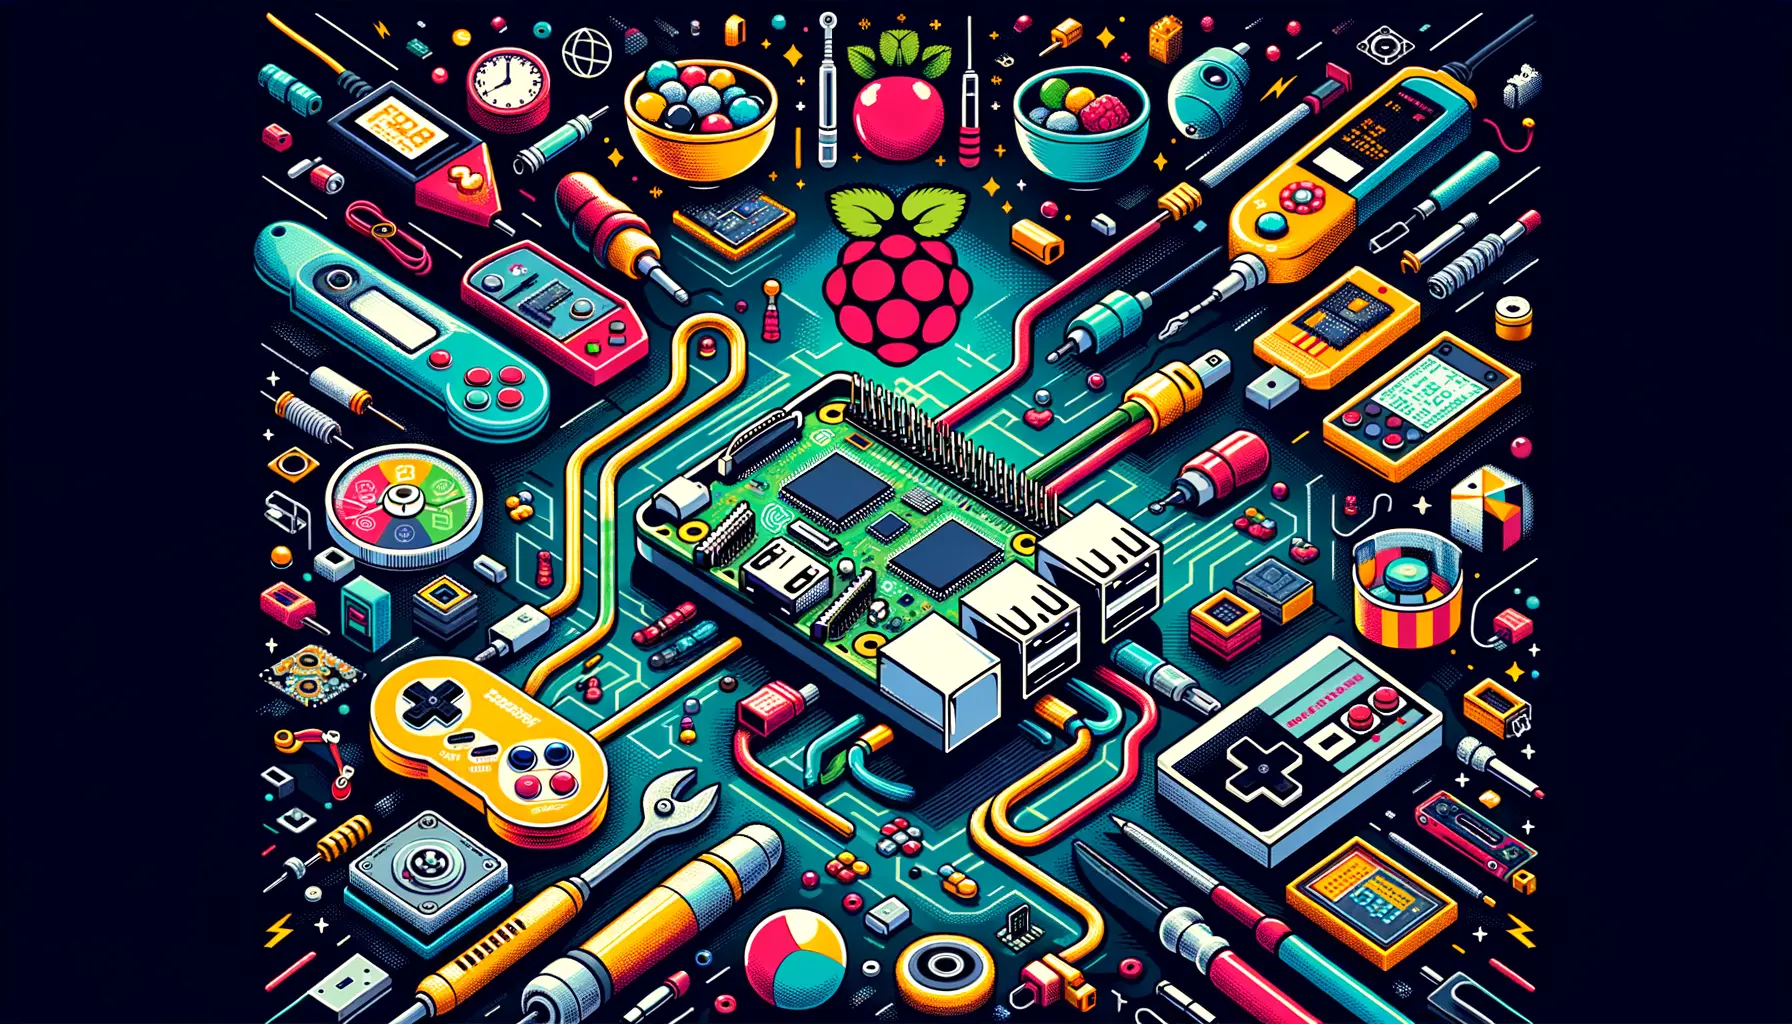 The Ultimate Guide to Building a Raspberry Pi Retro Game Console